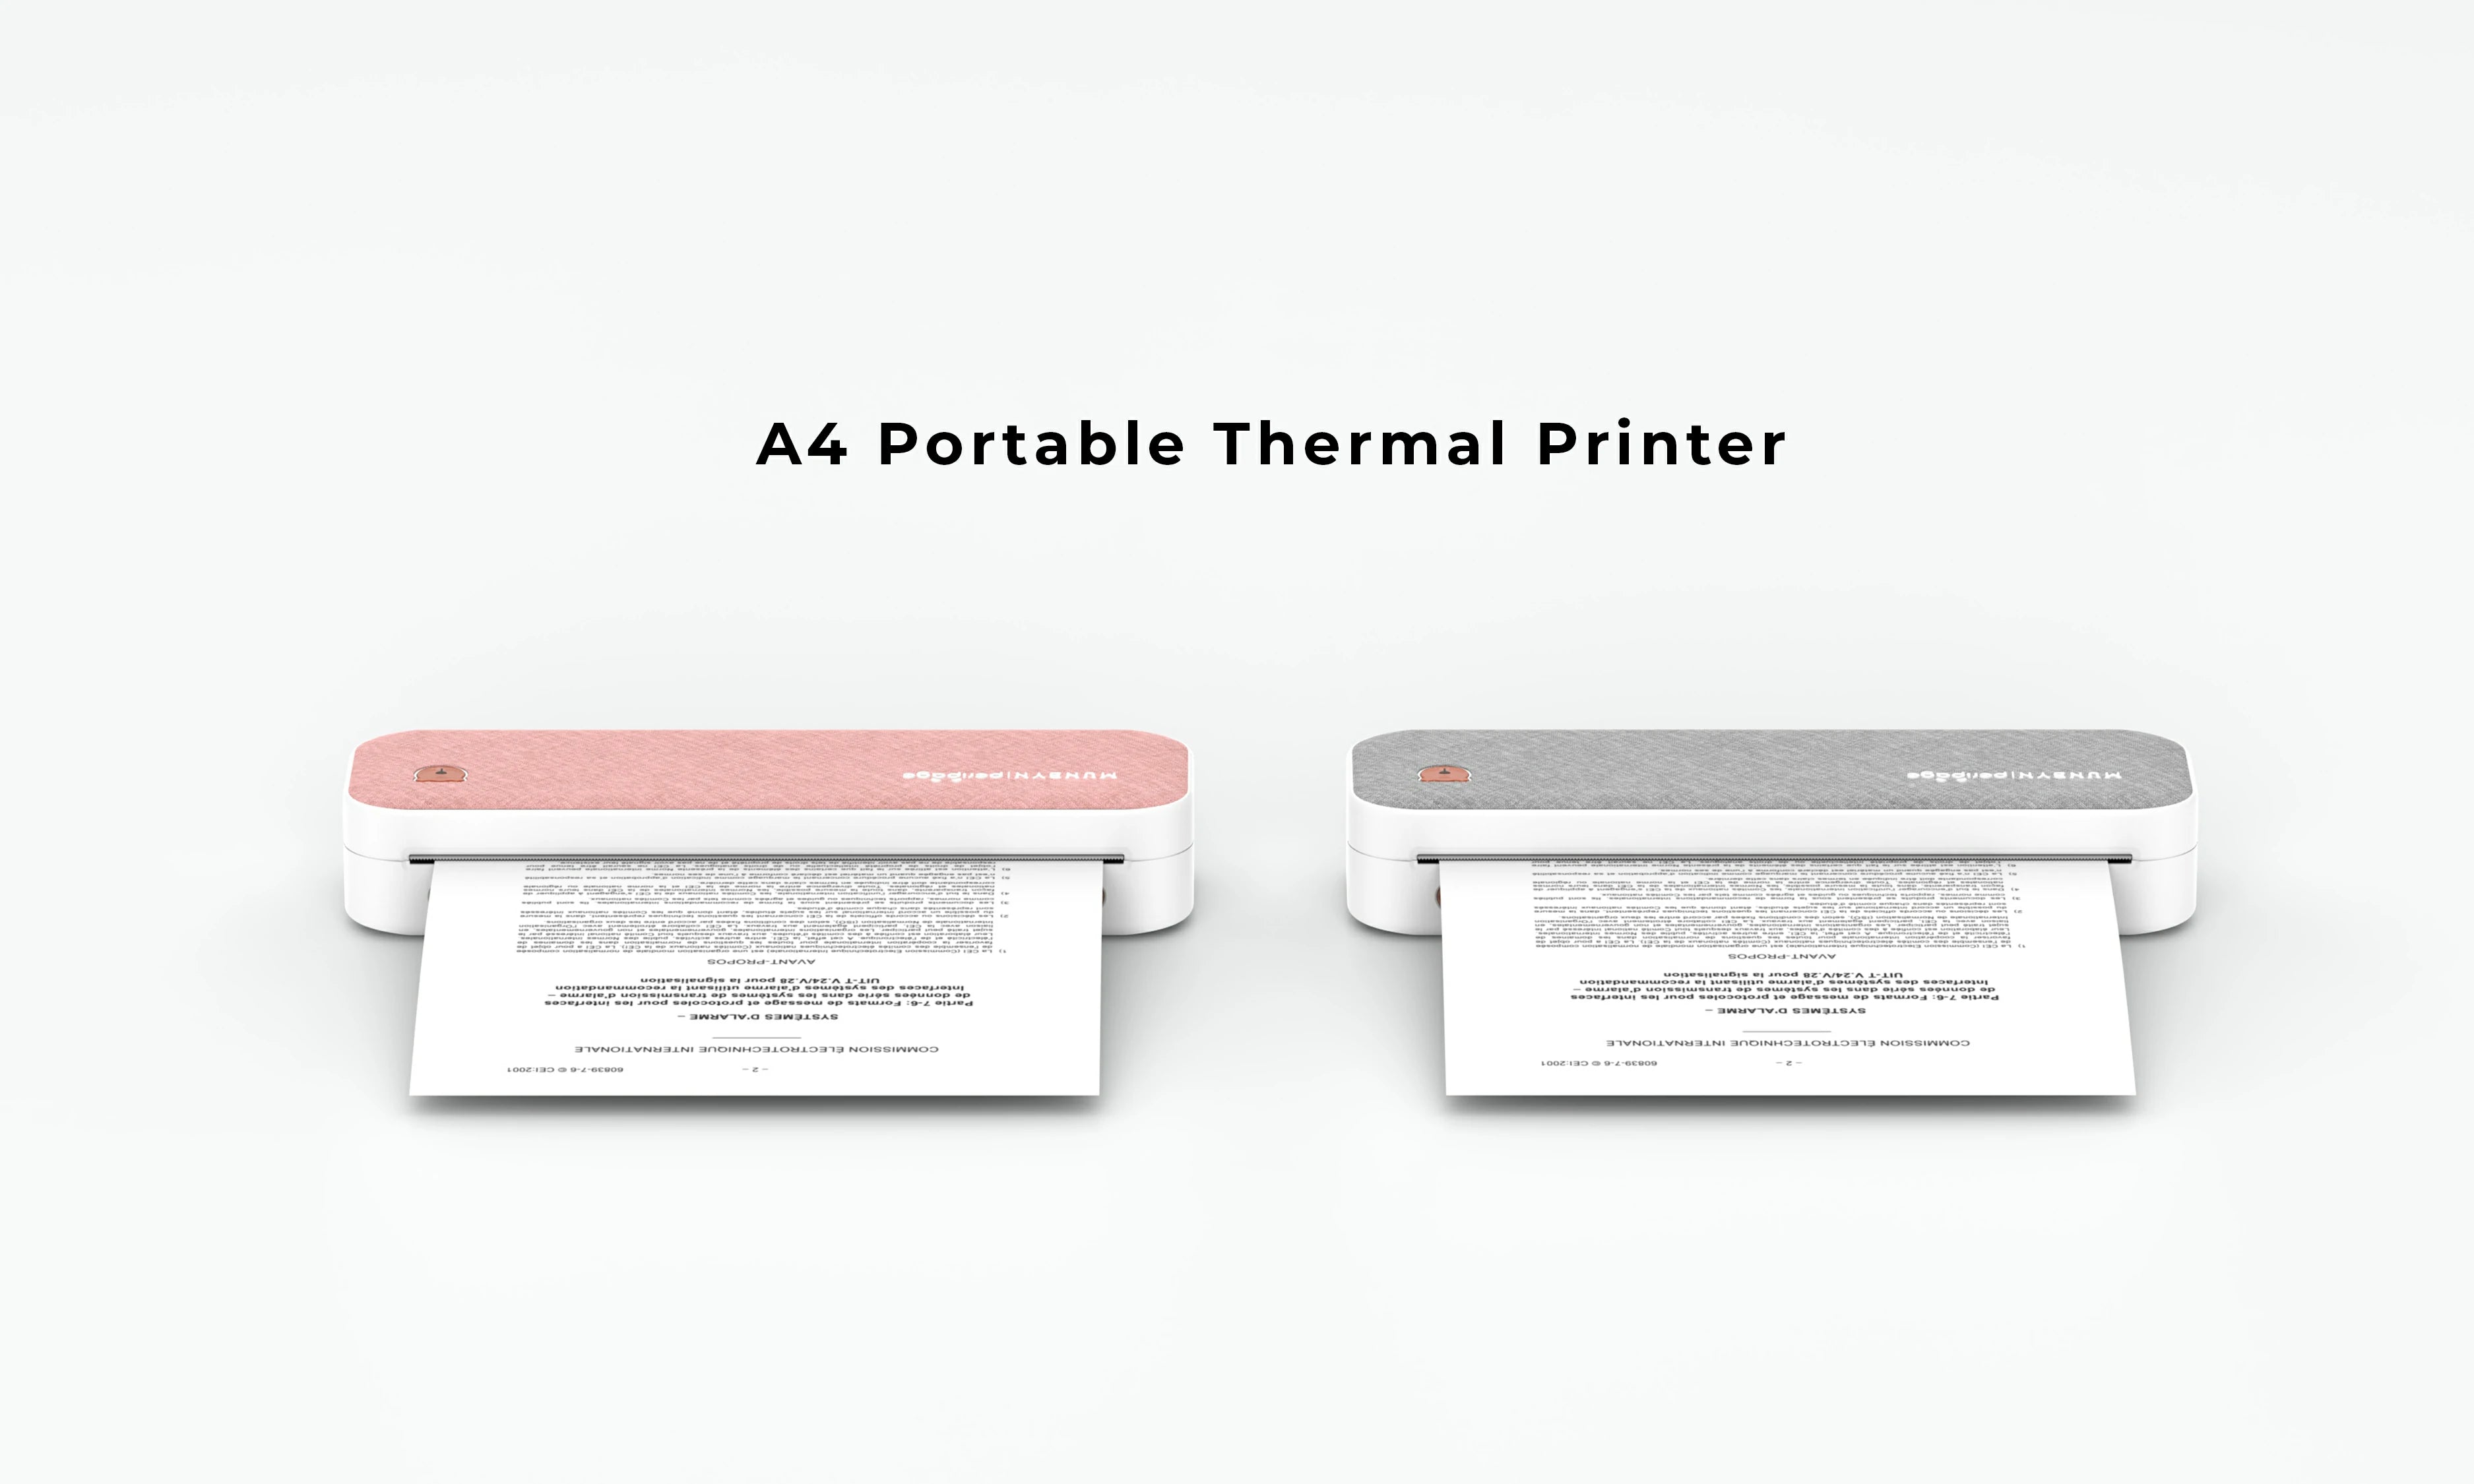 MUNBYN A4 thermal printer is portable and easy to use.